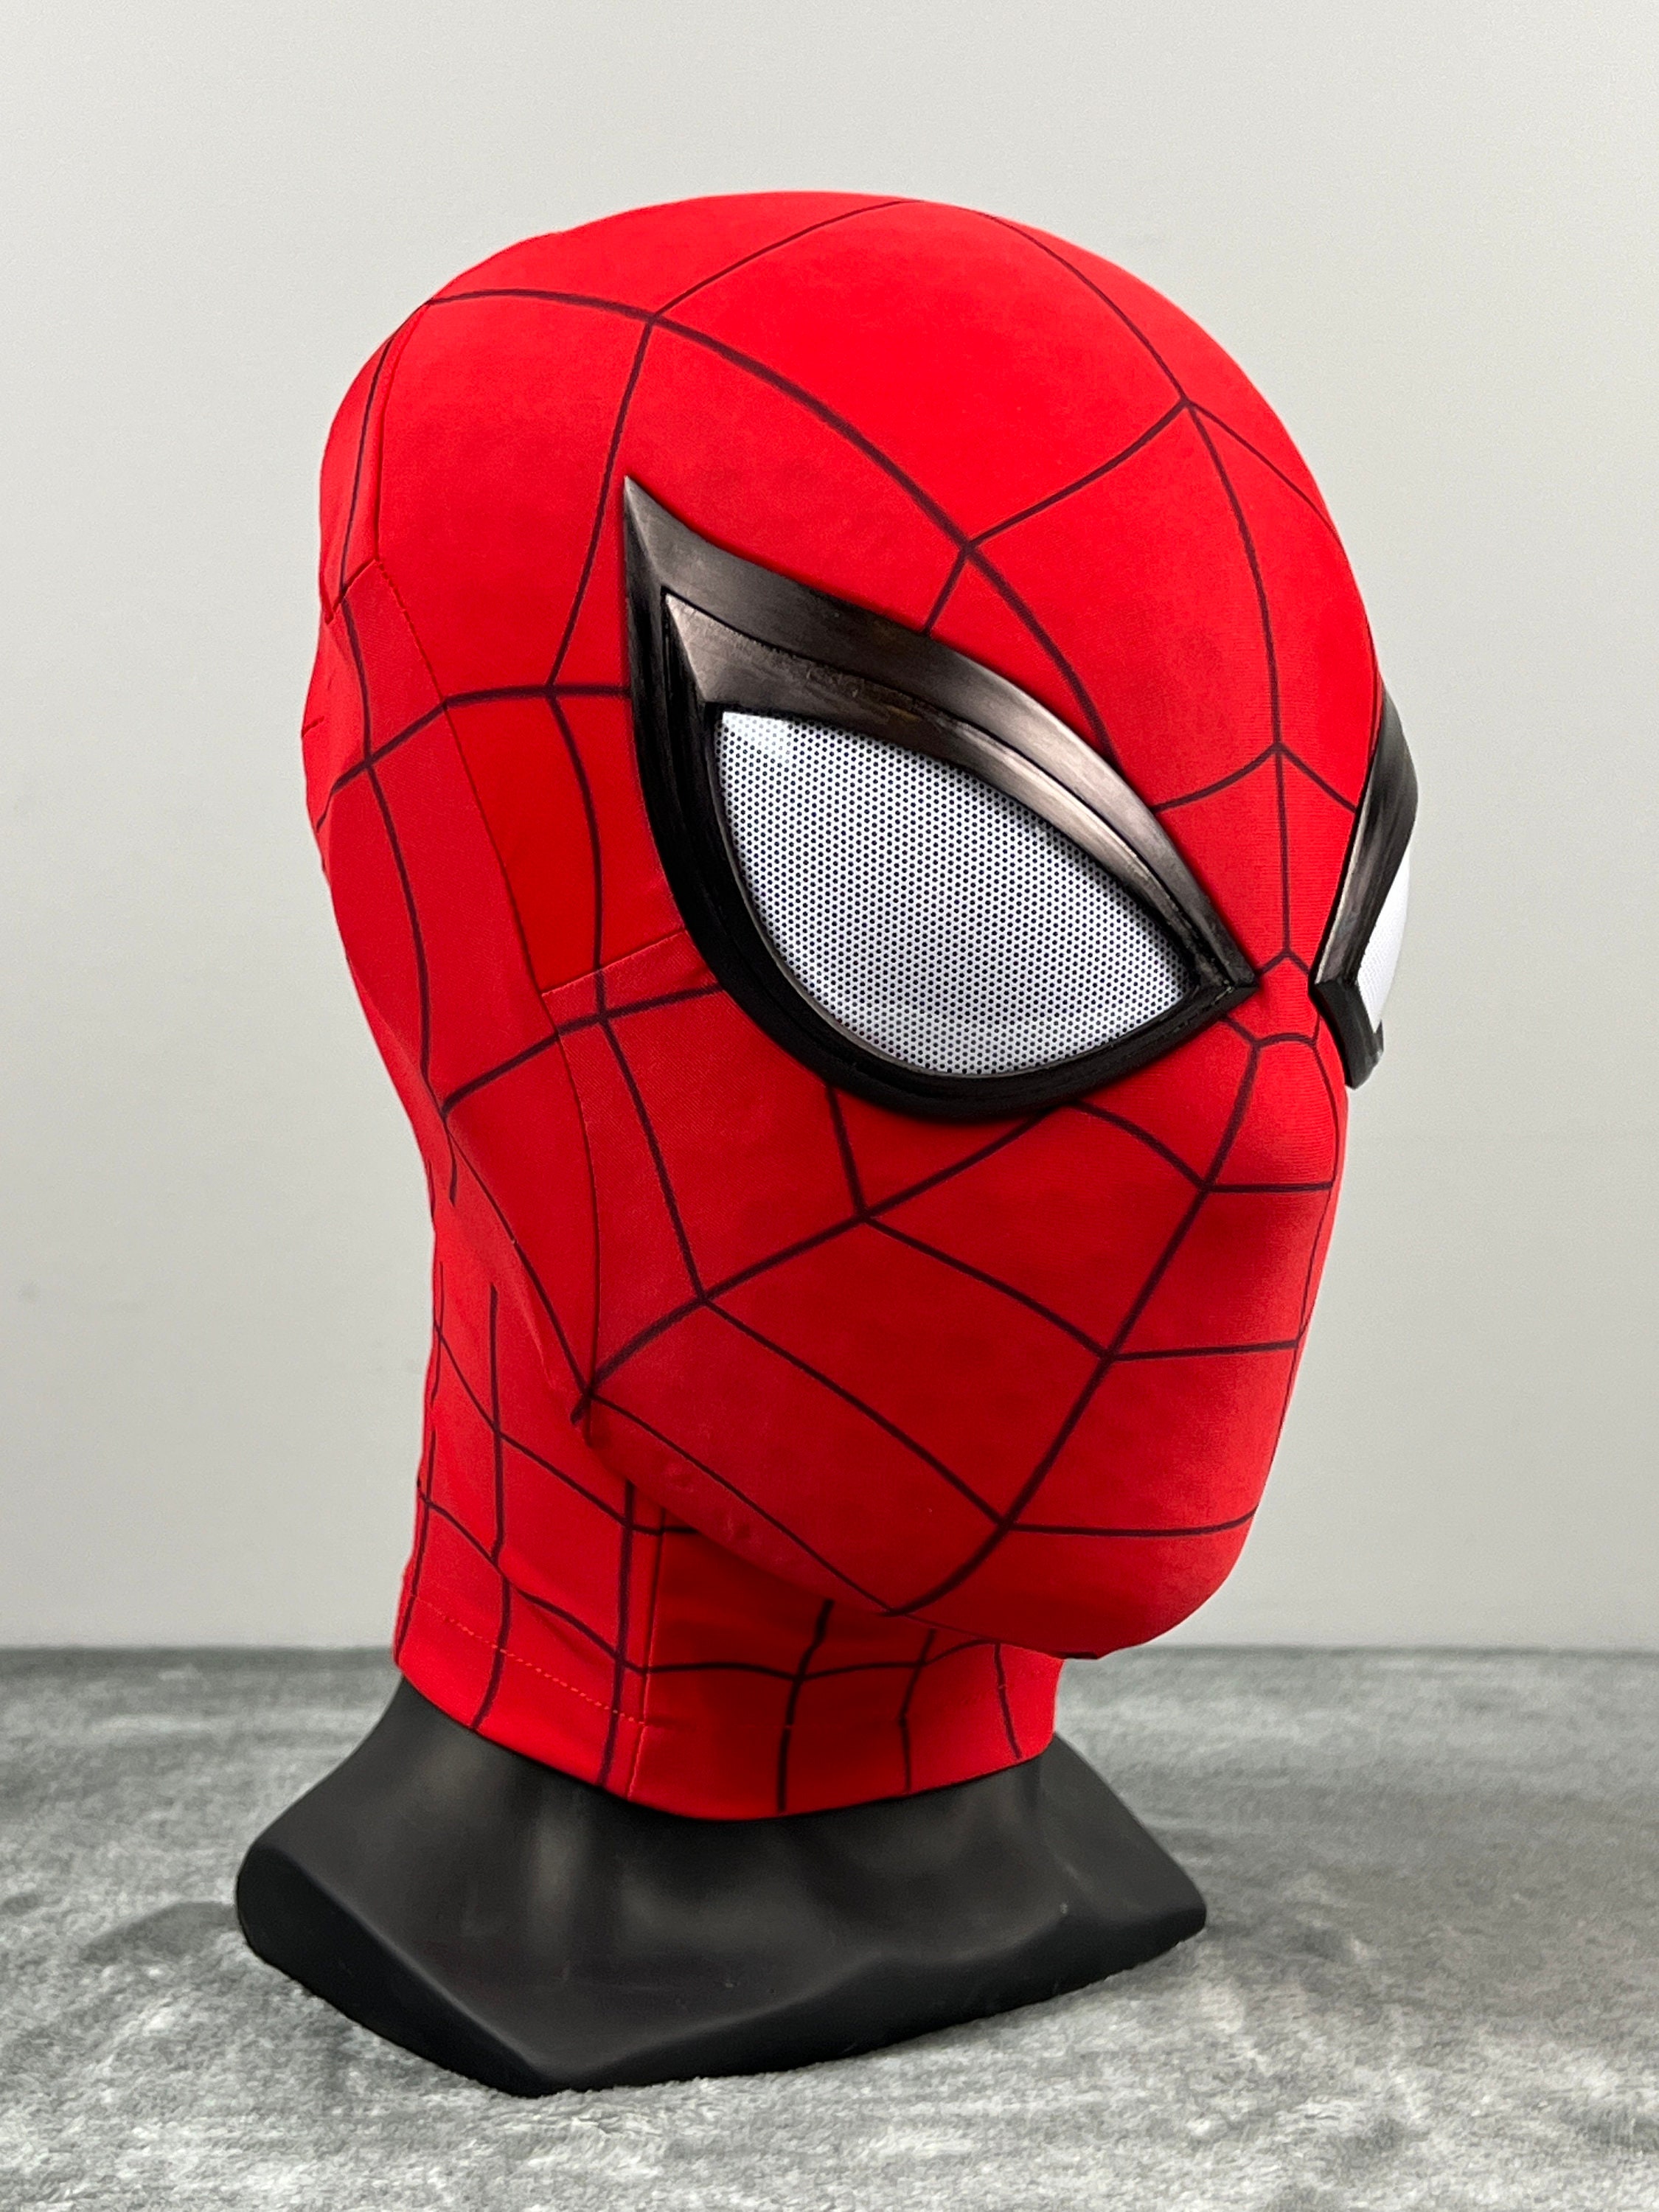 Spider-Man Far From Home Spider-Man Cosplay Costume with Sole, Spiderman  Costumes - CosSuits